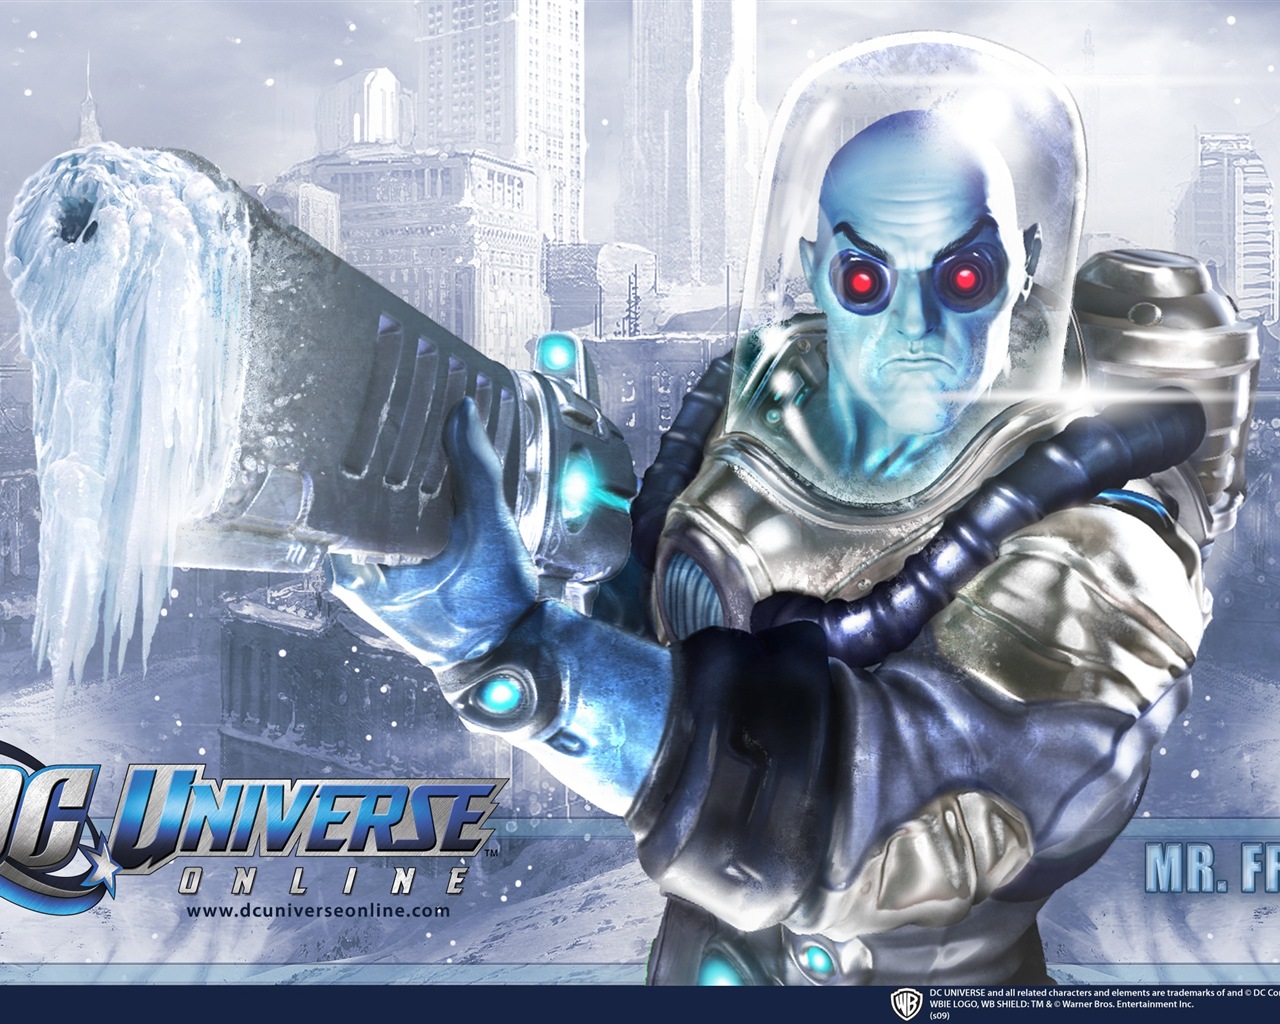 DC Universe Online HD game wallpapers #20 - 1280x1024